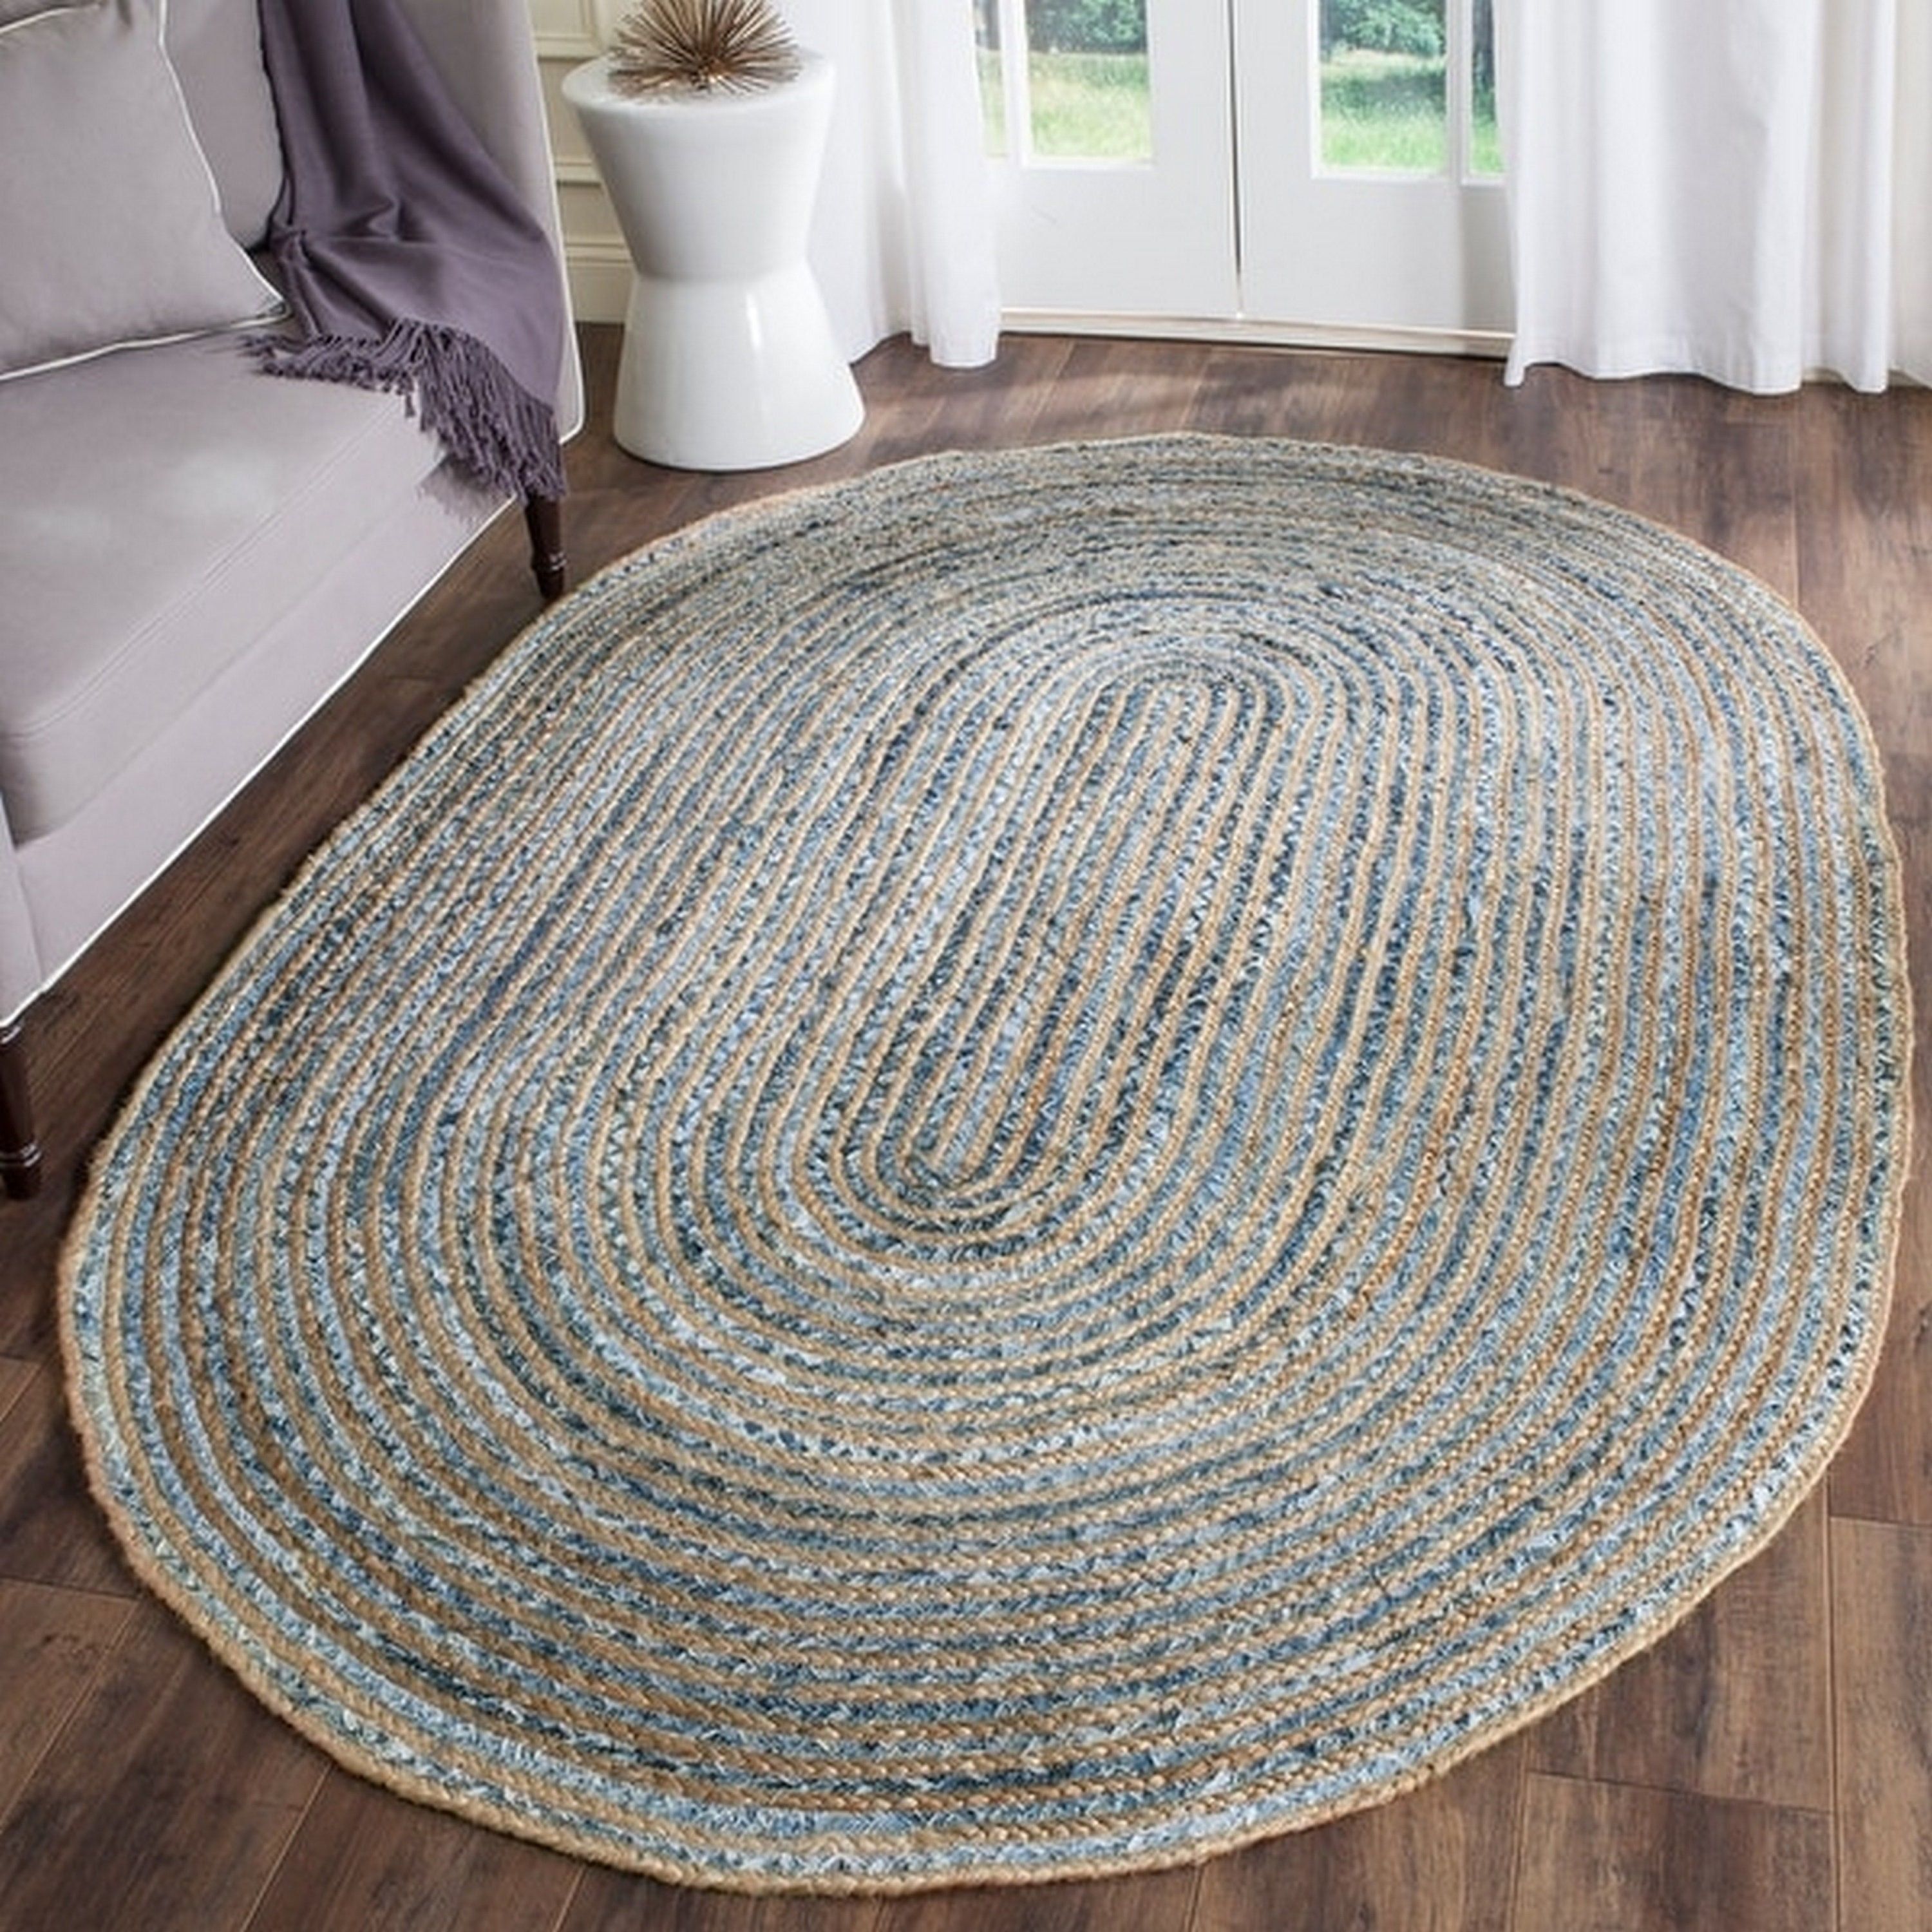 Oval Shag Rug – Etsy Intended For Shag Oval Rugs (View 12 of 15)